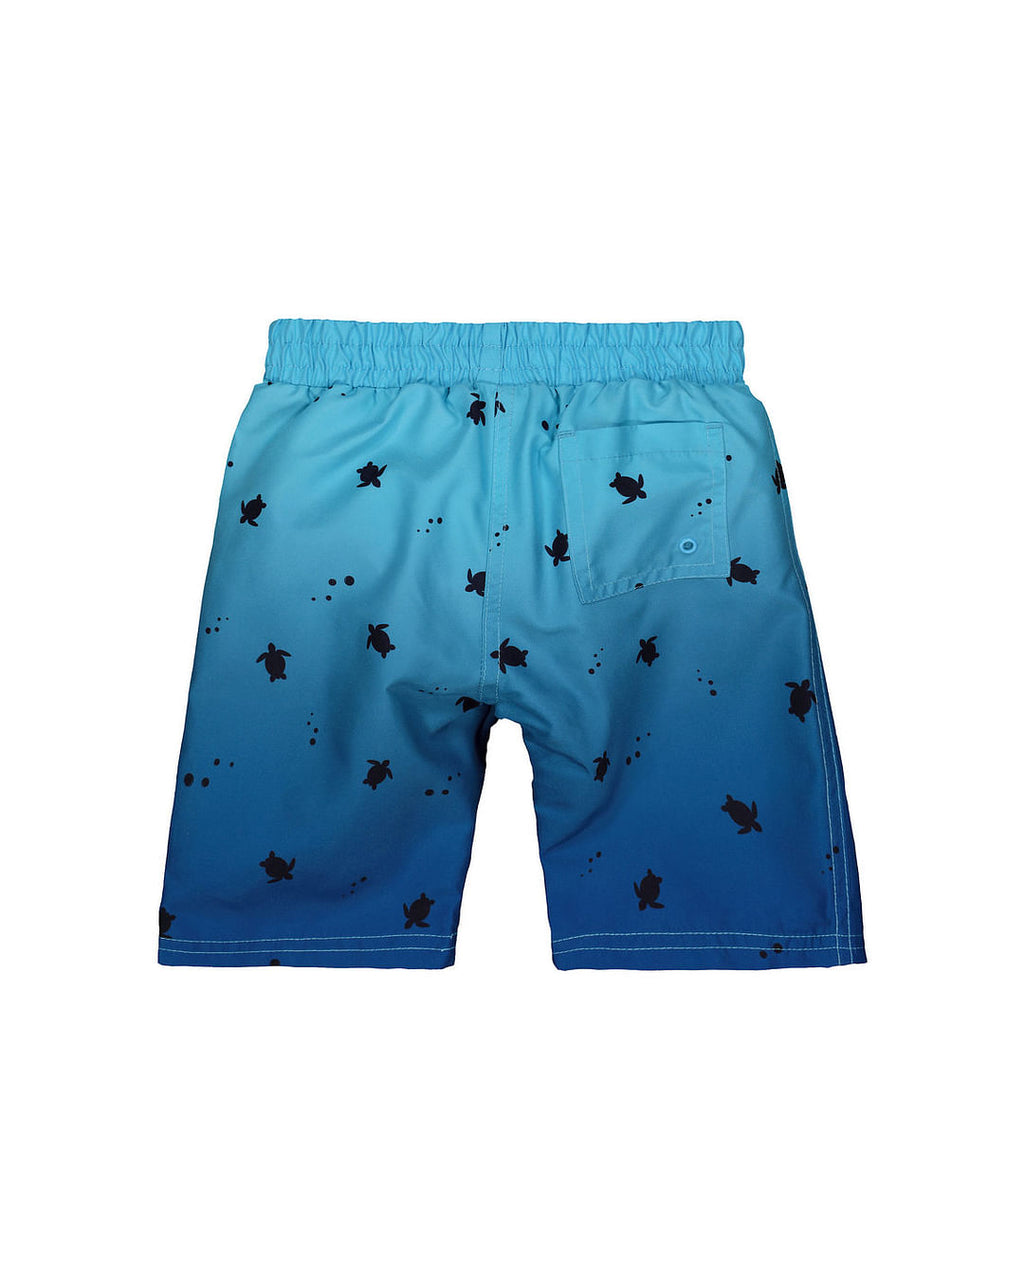 The Beach Company India - Buy printed kids swimwear online at low prices - Blue Ombre Turtle Board Shorts - swim short for boys - young boys swimming shorts